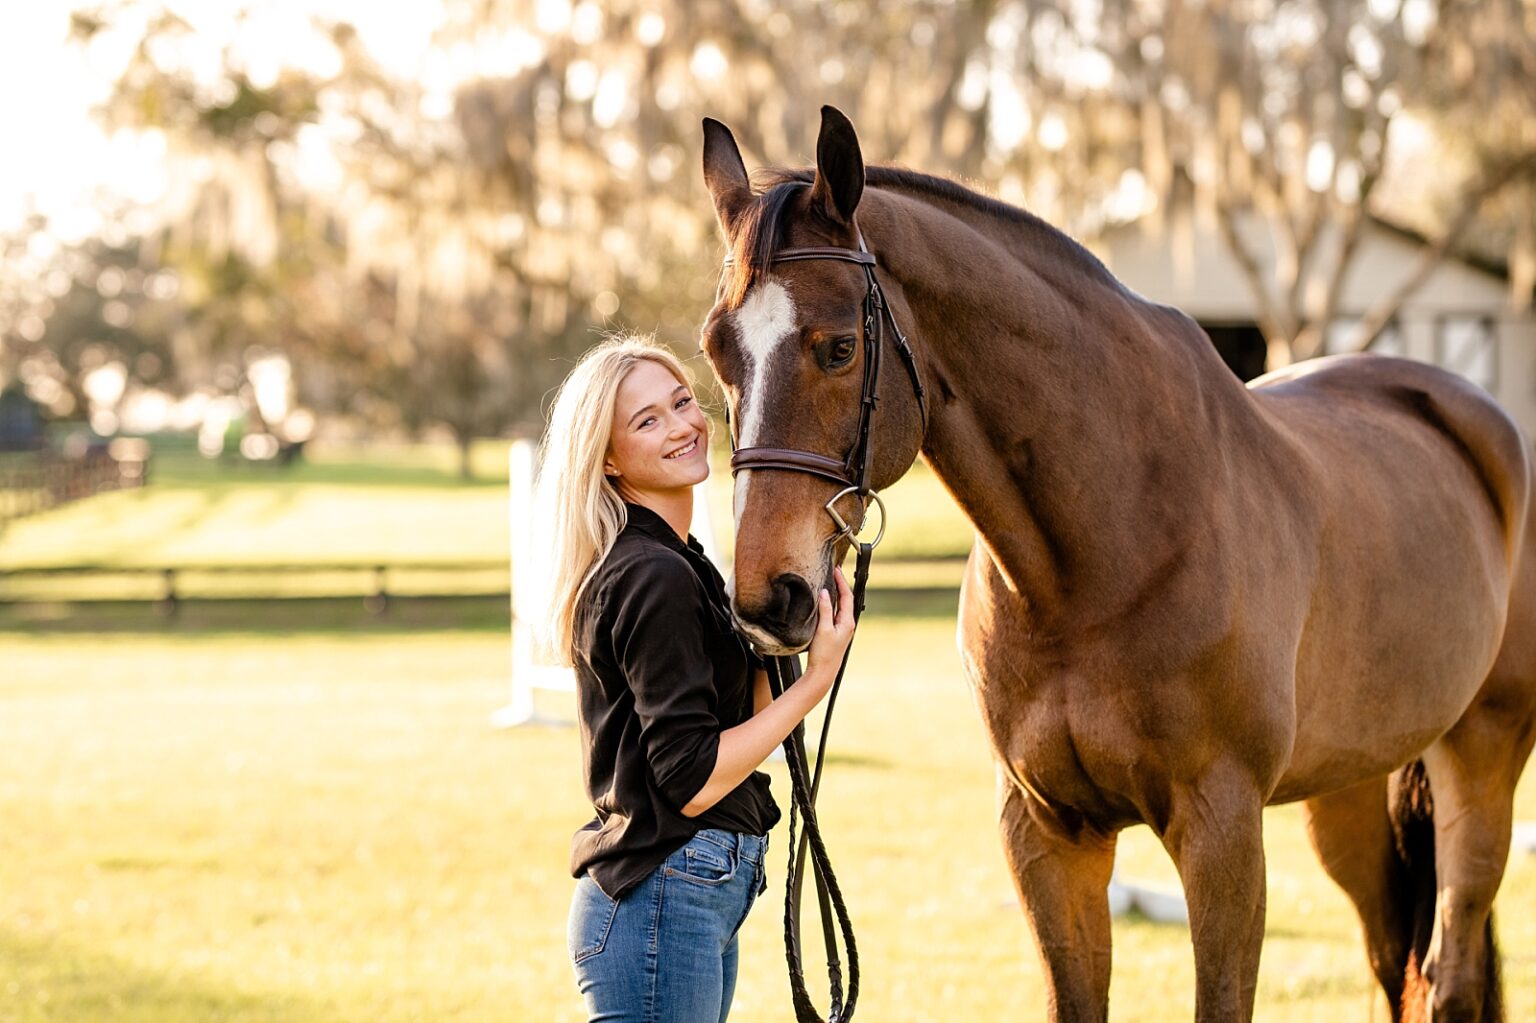 Horse and rider photoshoot in Ocala at Golden Oaks Farm LLC. Hunter/jumper rider attending University of Georgia equestrian team. Senior photos with college attire. Posing for horse and rider.